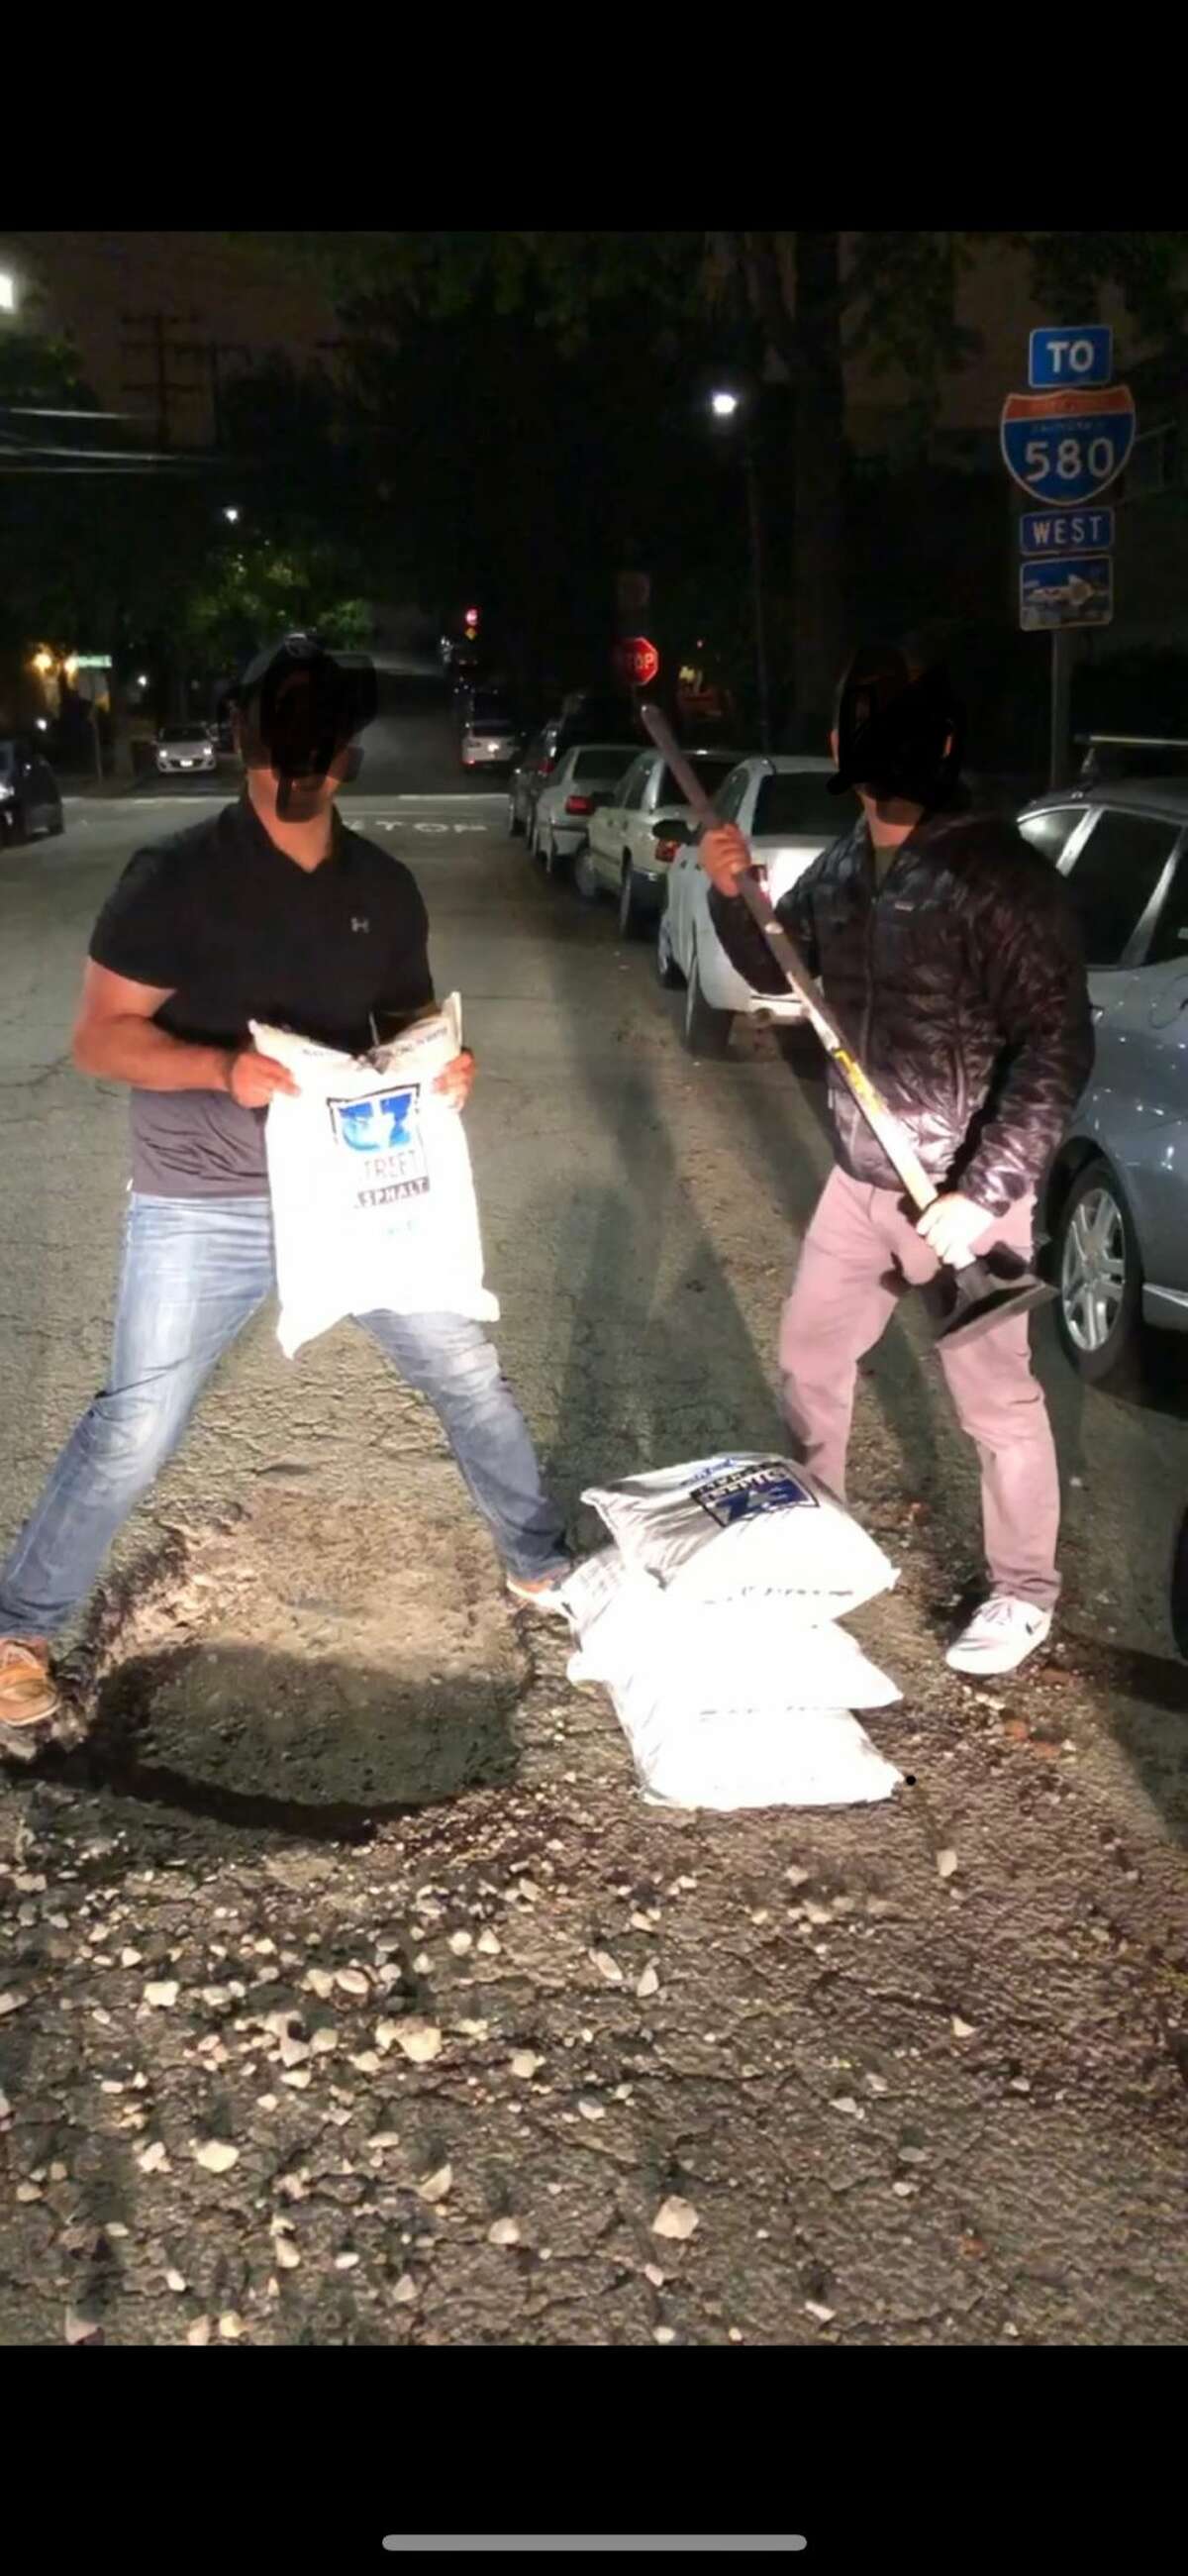 The "Pothole Vigilantes" shared photos of potholes they've patched up in Oakland in recent weeks. They edited this photo before sharing to obscure identities.